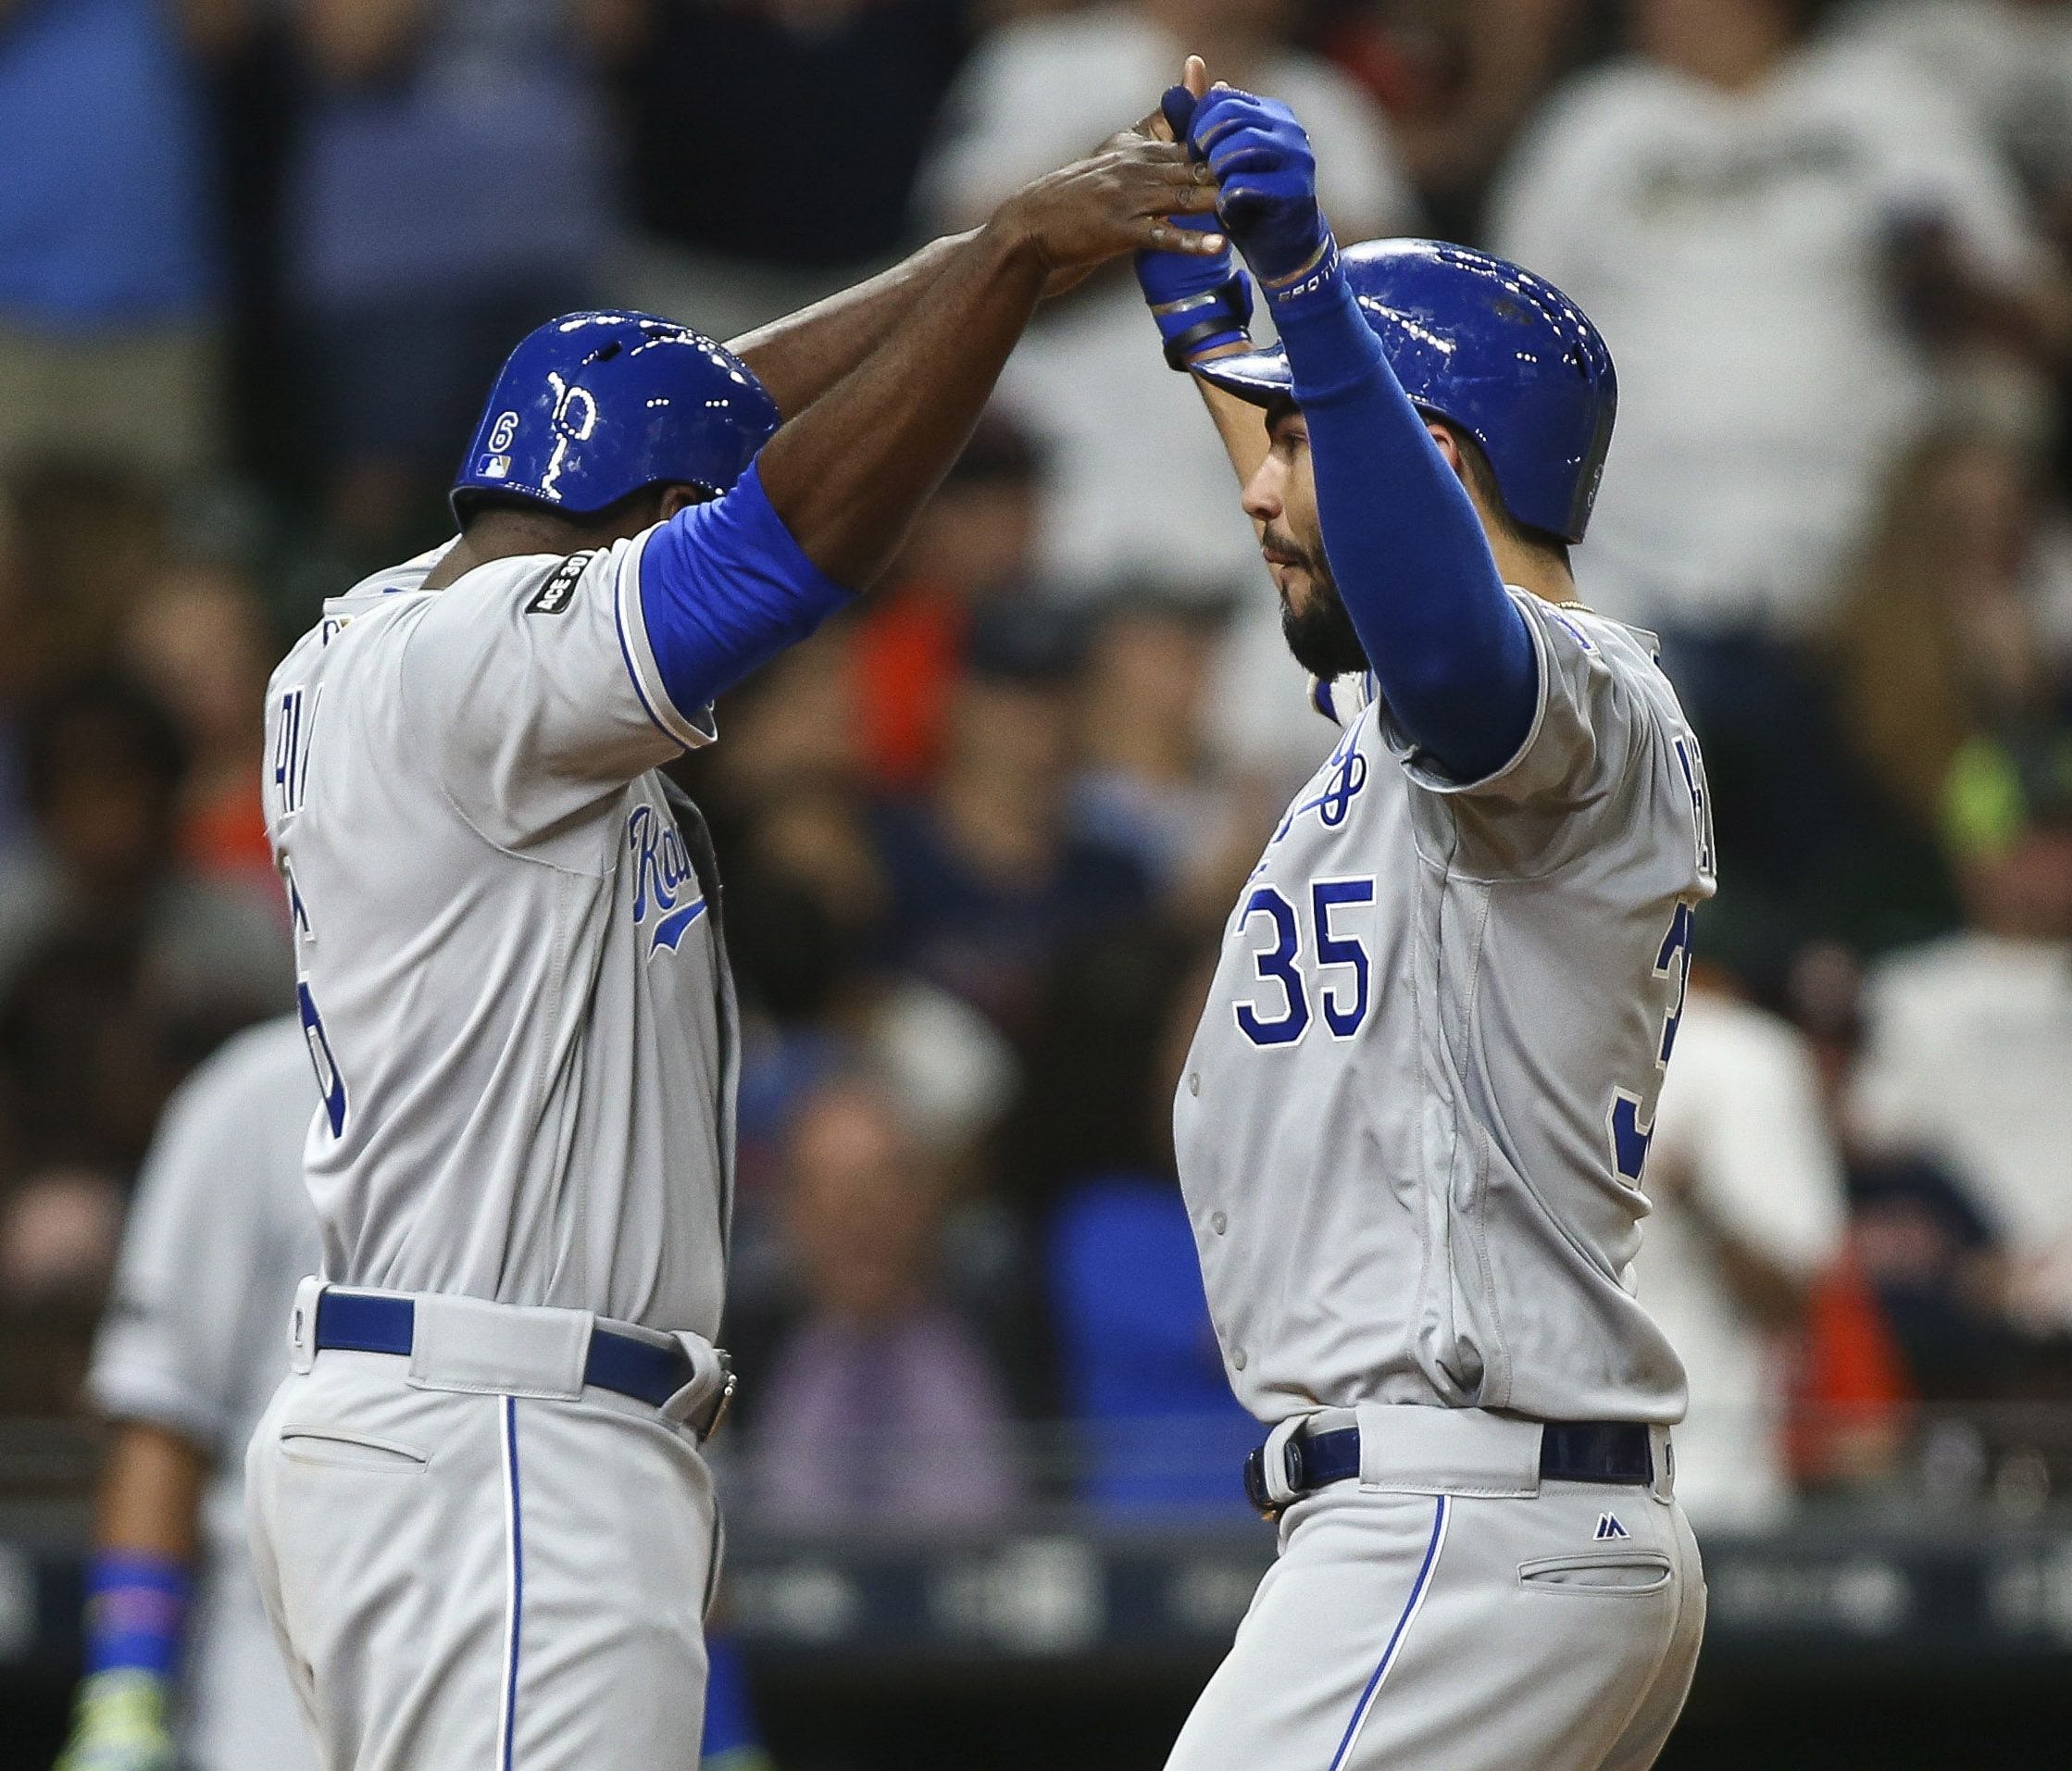 With the Kansas City Royals 21-29 and in last place in the AL Central, Lorenzo Cain and Eric Hosmer are among several who could be on the move from K.C.